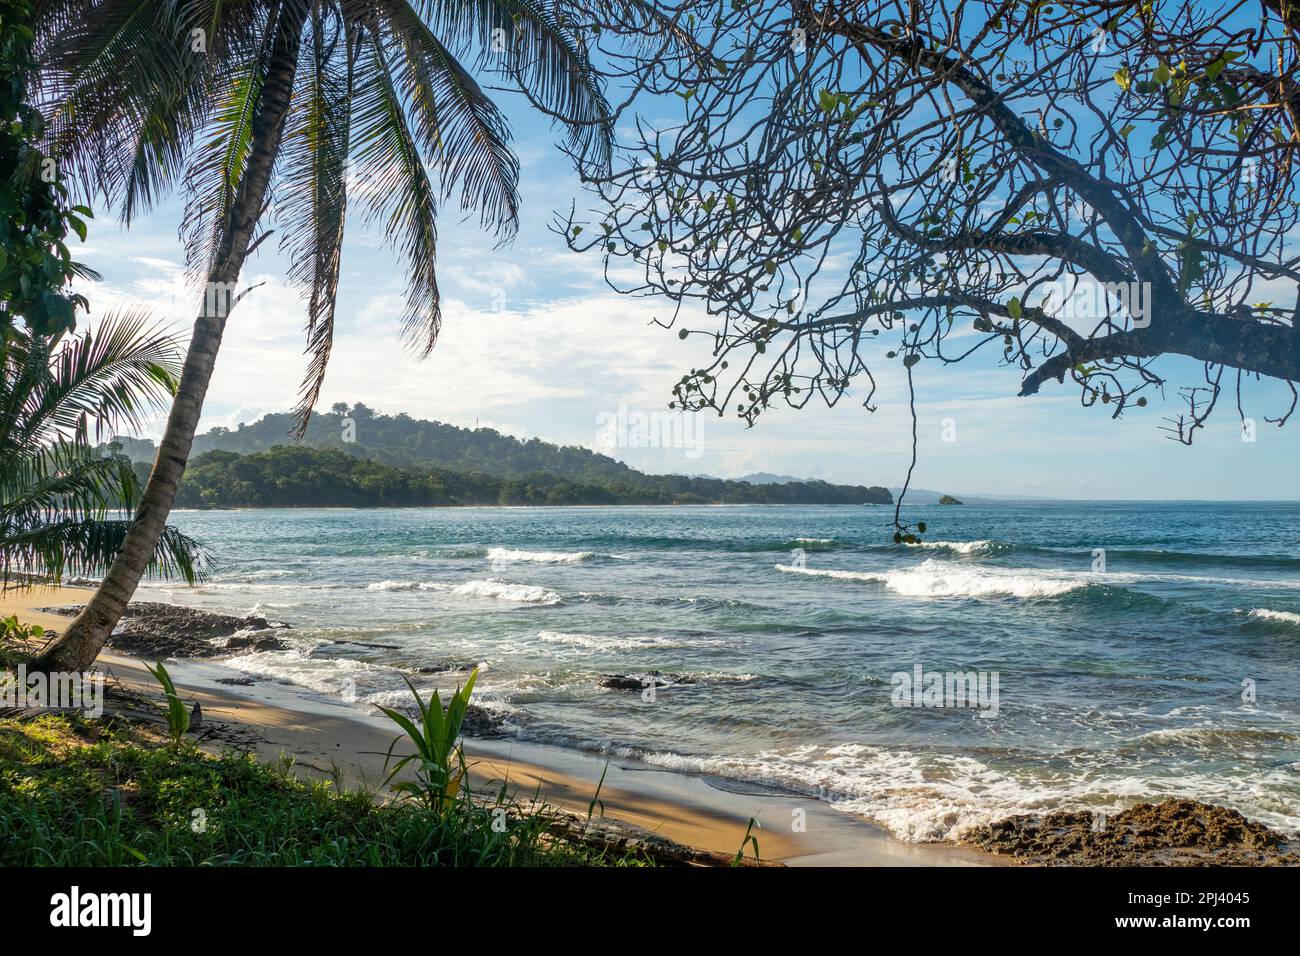 scenic  beach of Cocles on the Caribbean side of Costa Rica, Puerto Viejo de Talamanca Stock Photo